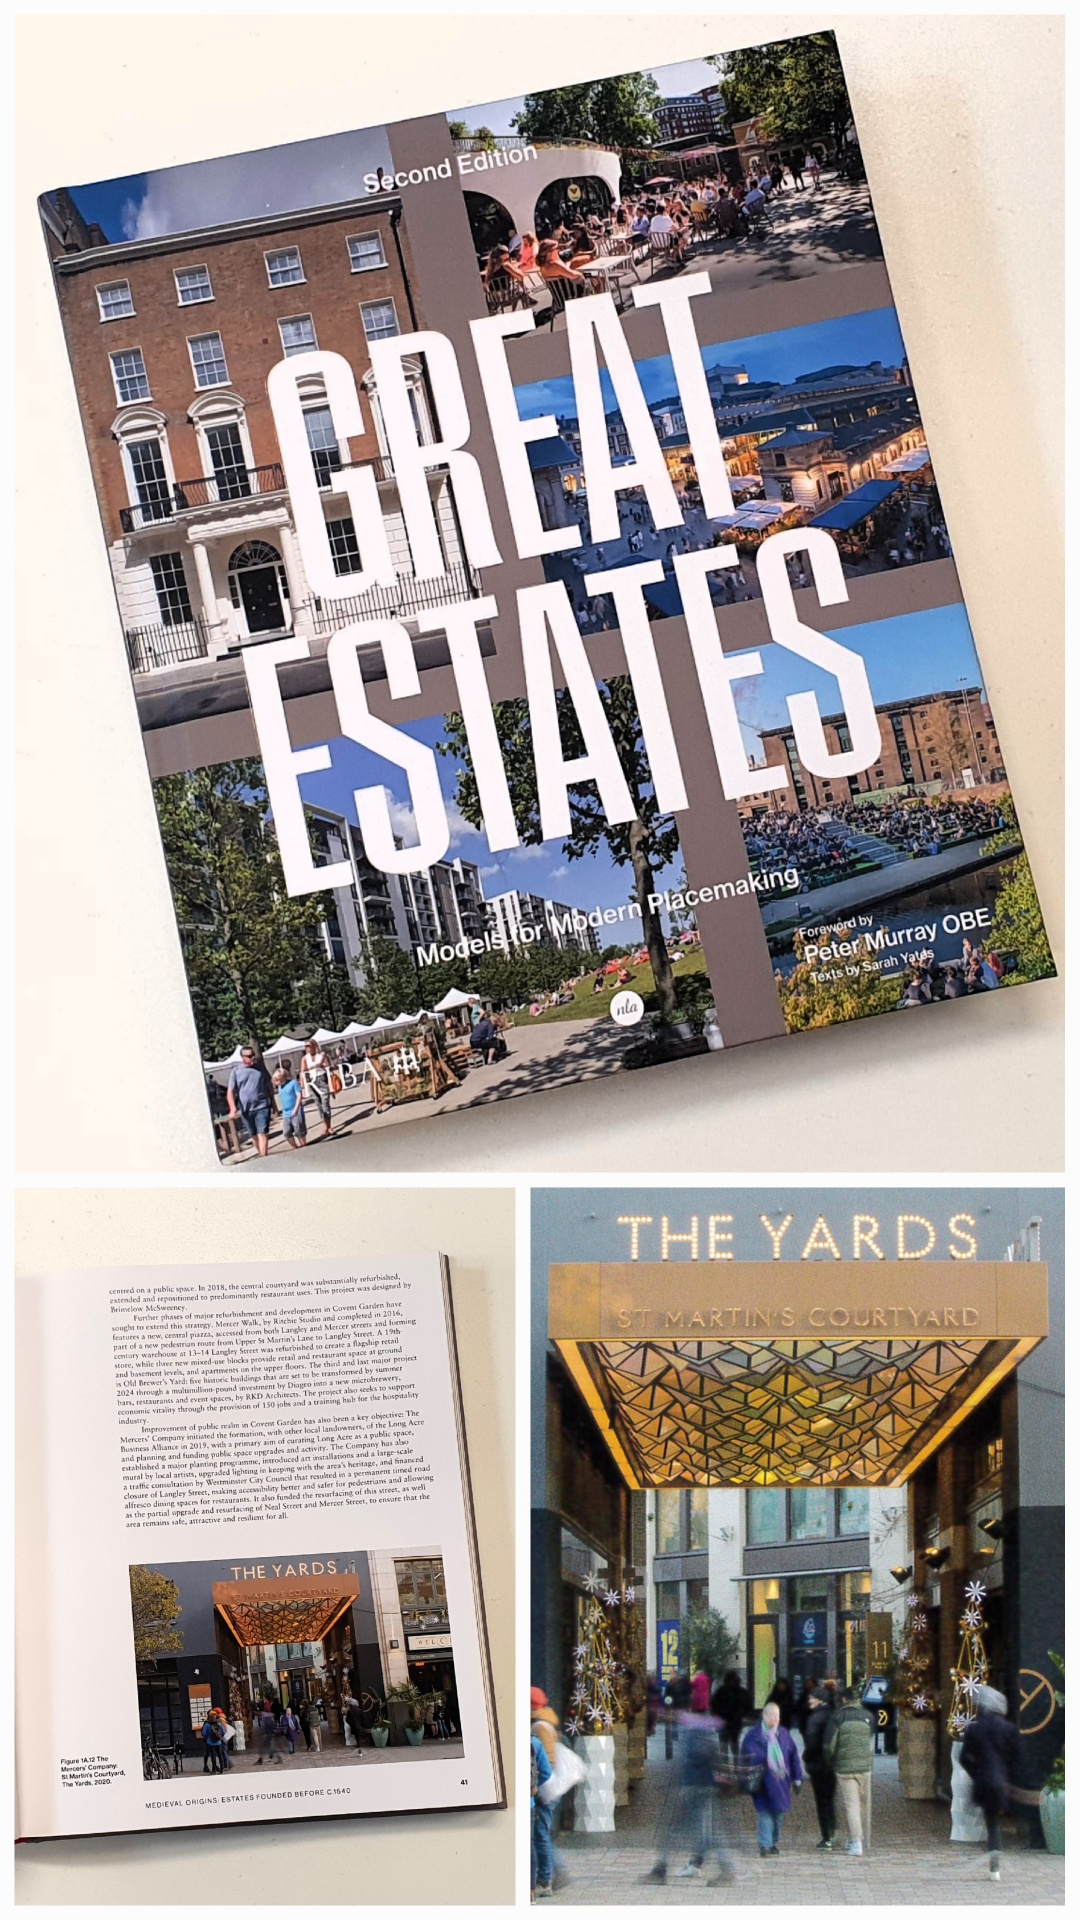 St. Martin's Courtyard featured in Great Estates book